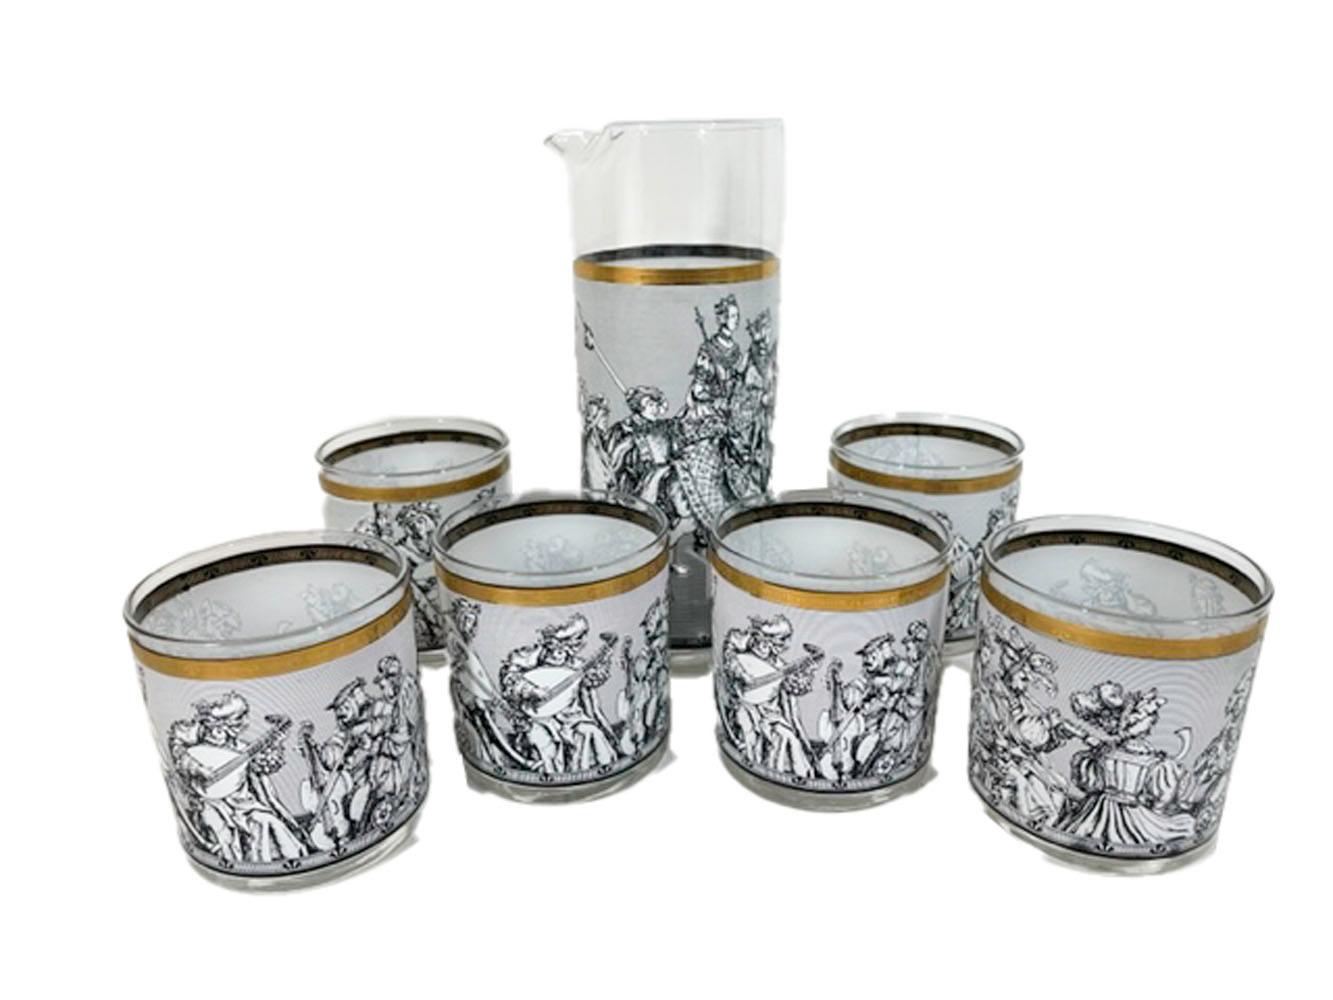 Vintage seven-piece cocktail set by Cera Glassware in the Camelot pattern. Executed in black lines on white ground in imitation of line engravings, each form in this pattern depicts people of the Medieval period in various pursuits. Above each scene